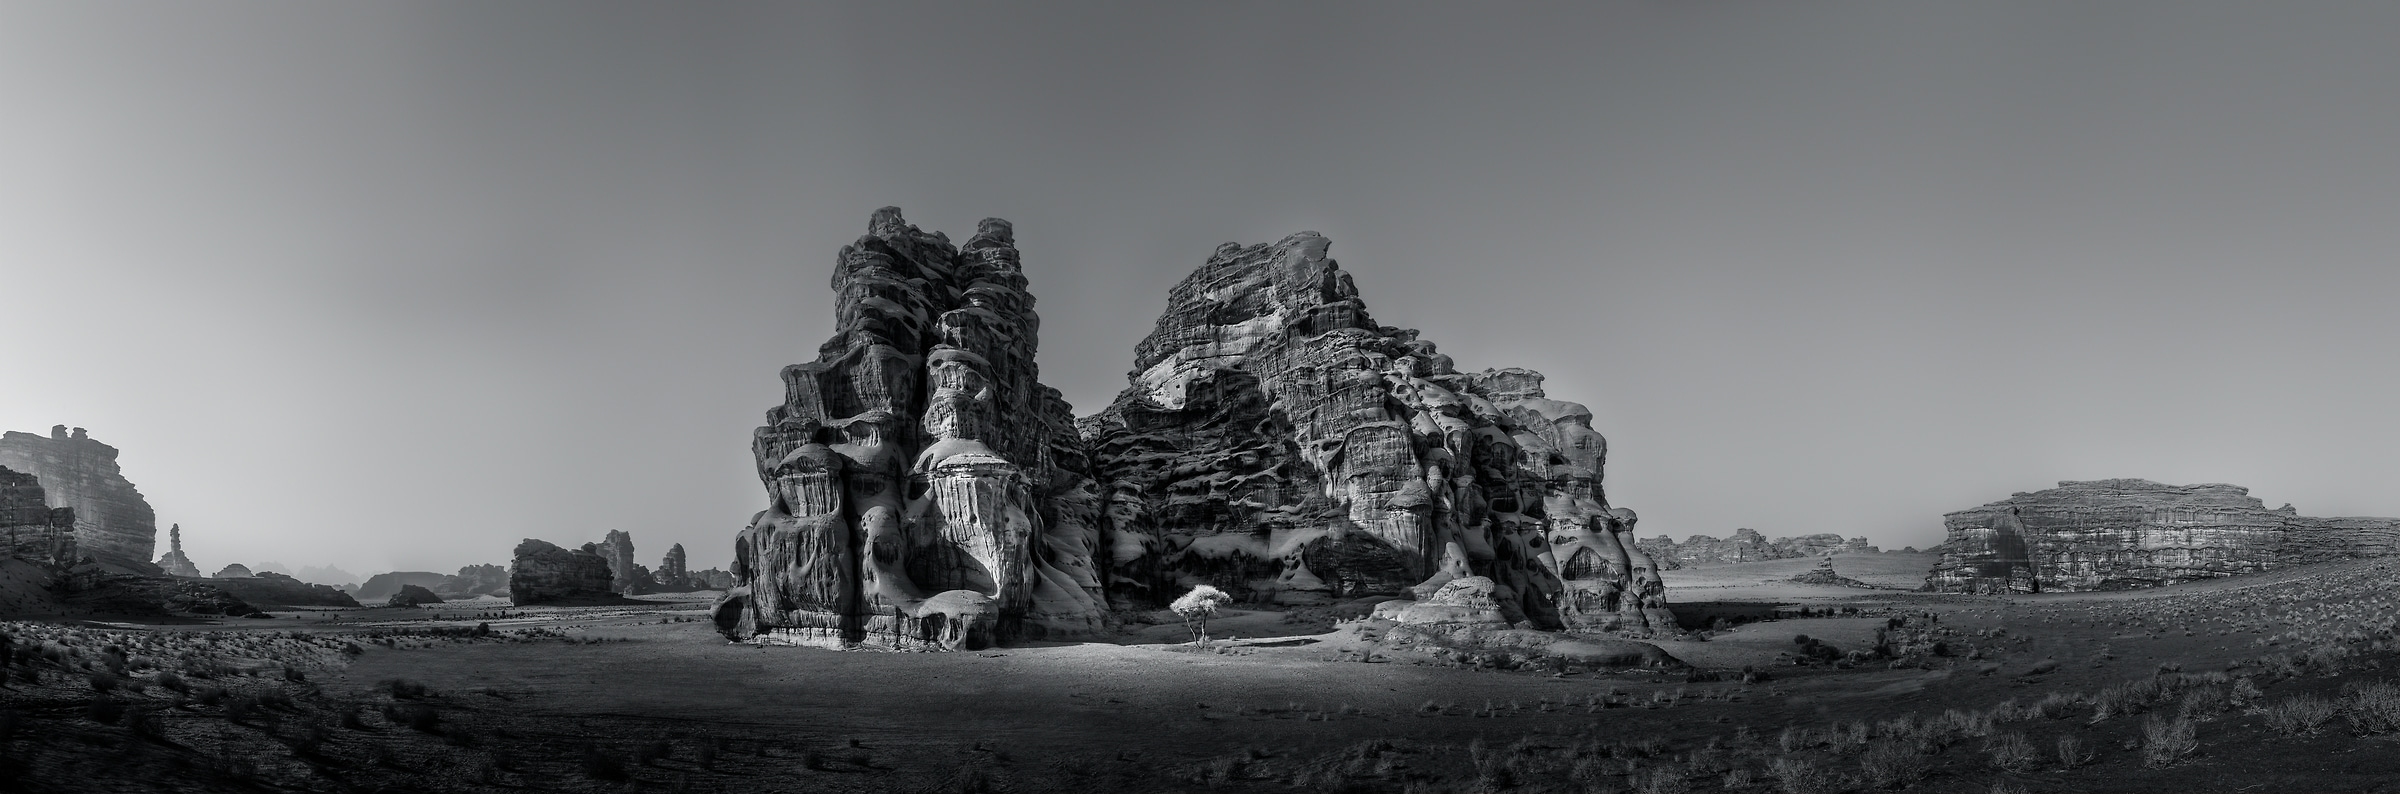 858 megapixels! A very high resolution, large-format VAST photo print of a surreal landscape; black & white photograph created by Peter Rodger in Tabuk, Saudi Arabia.